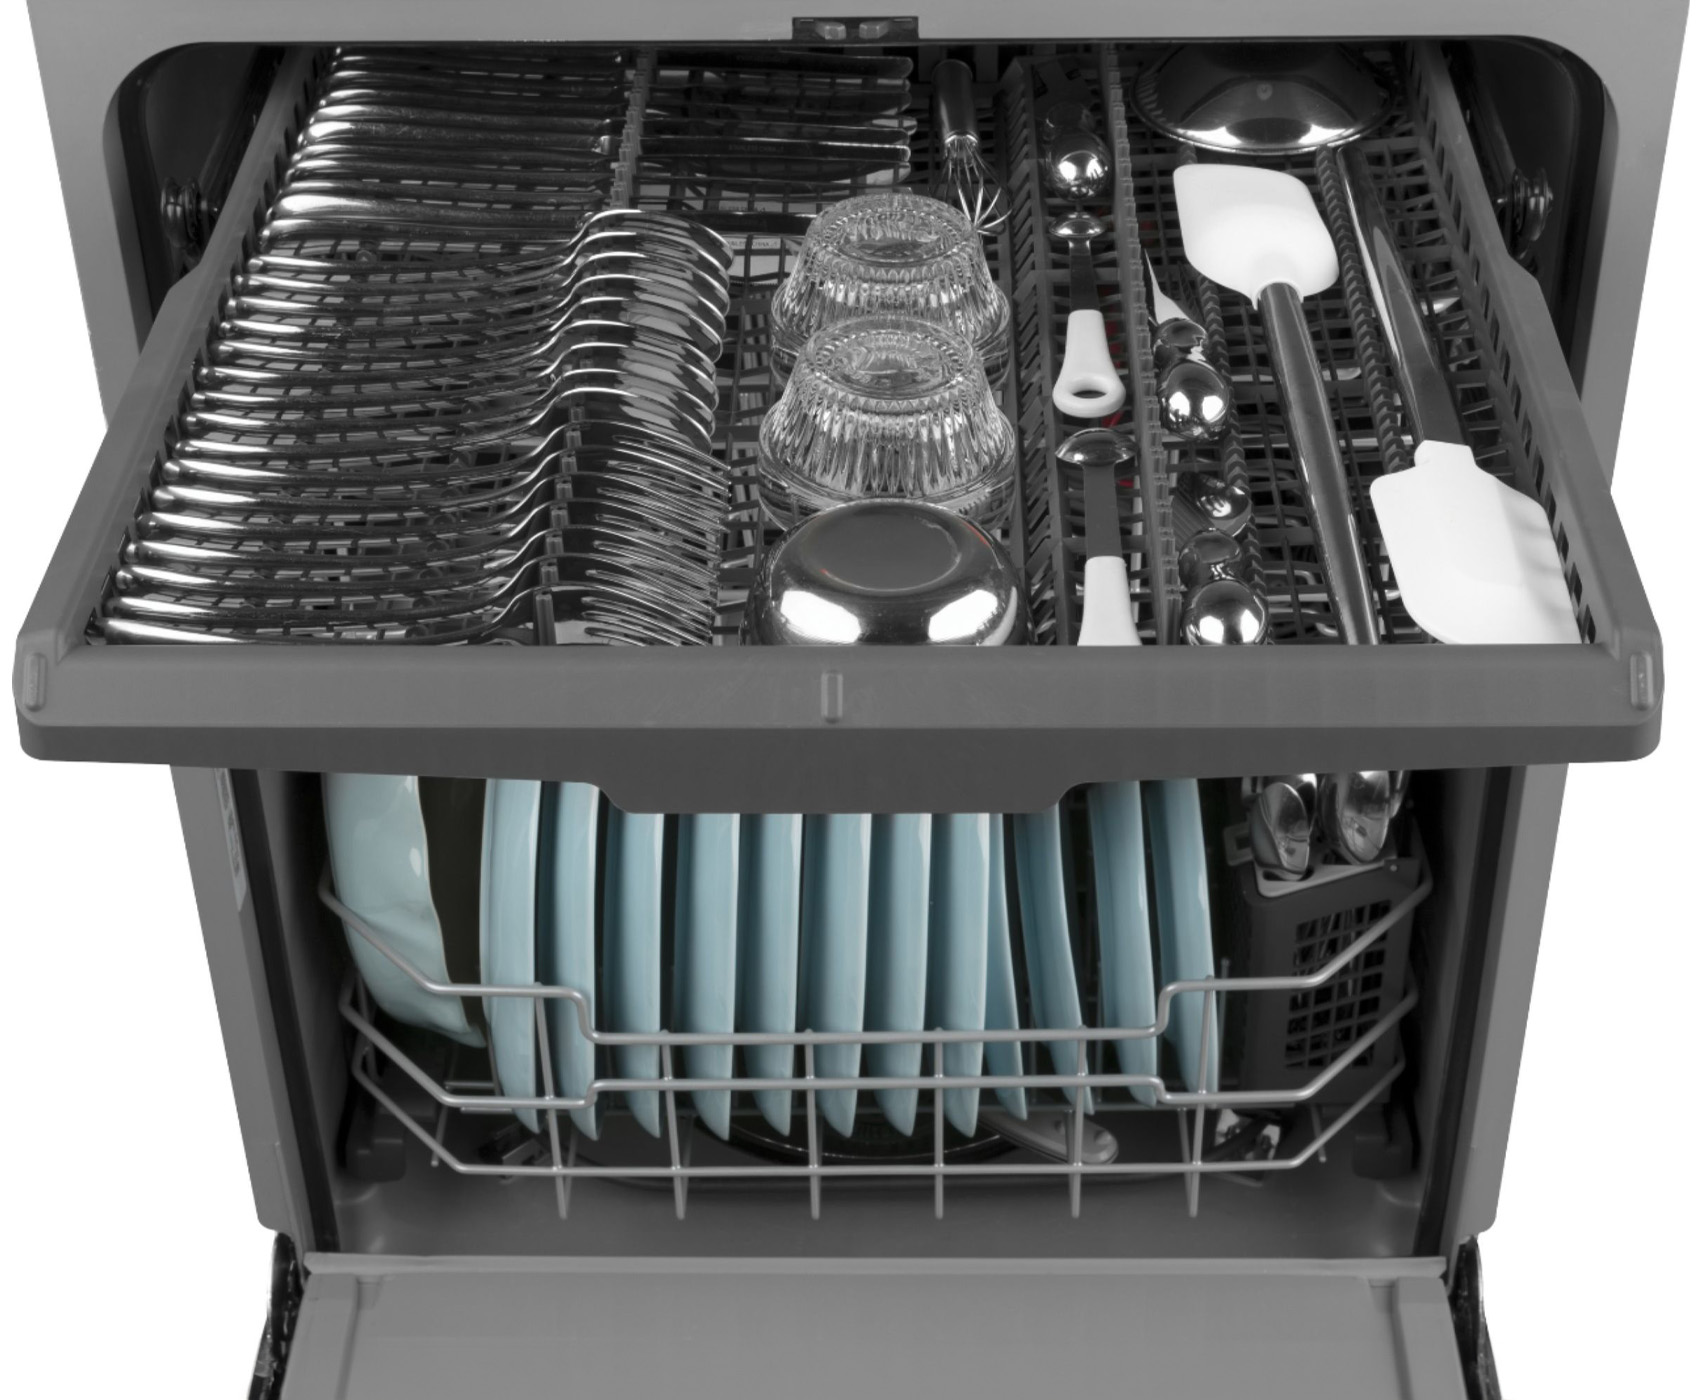 how to reset GE dishwasher 2.0